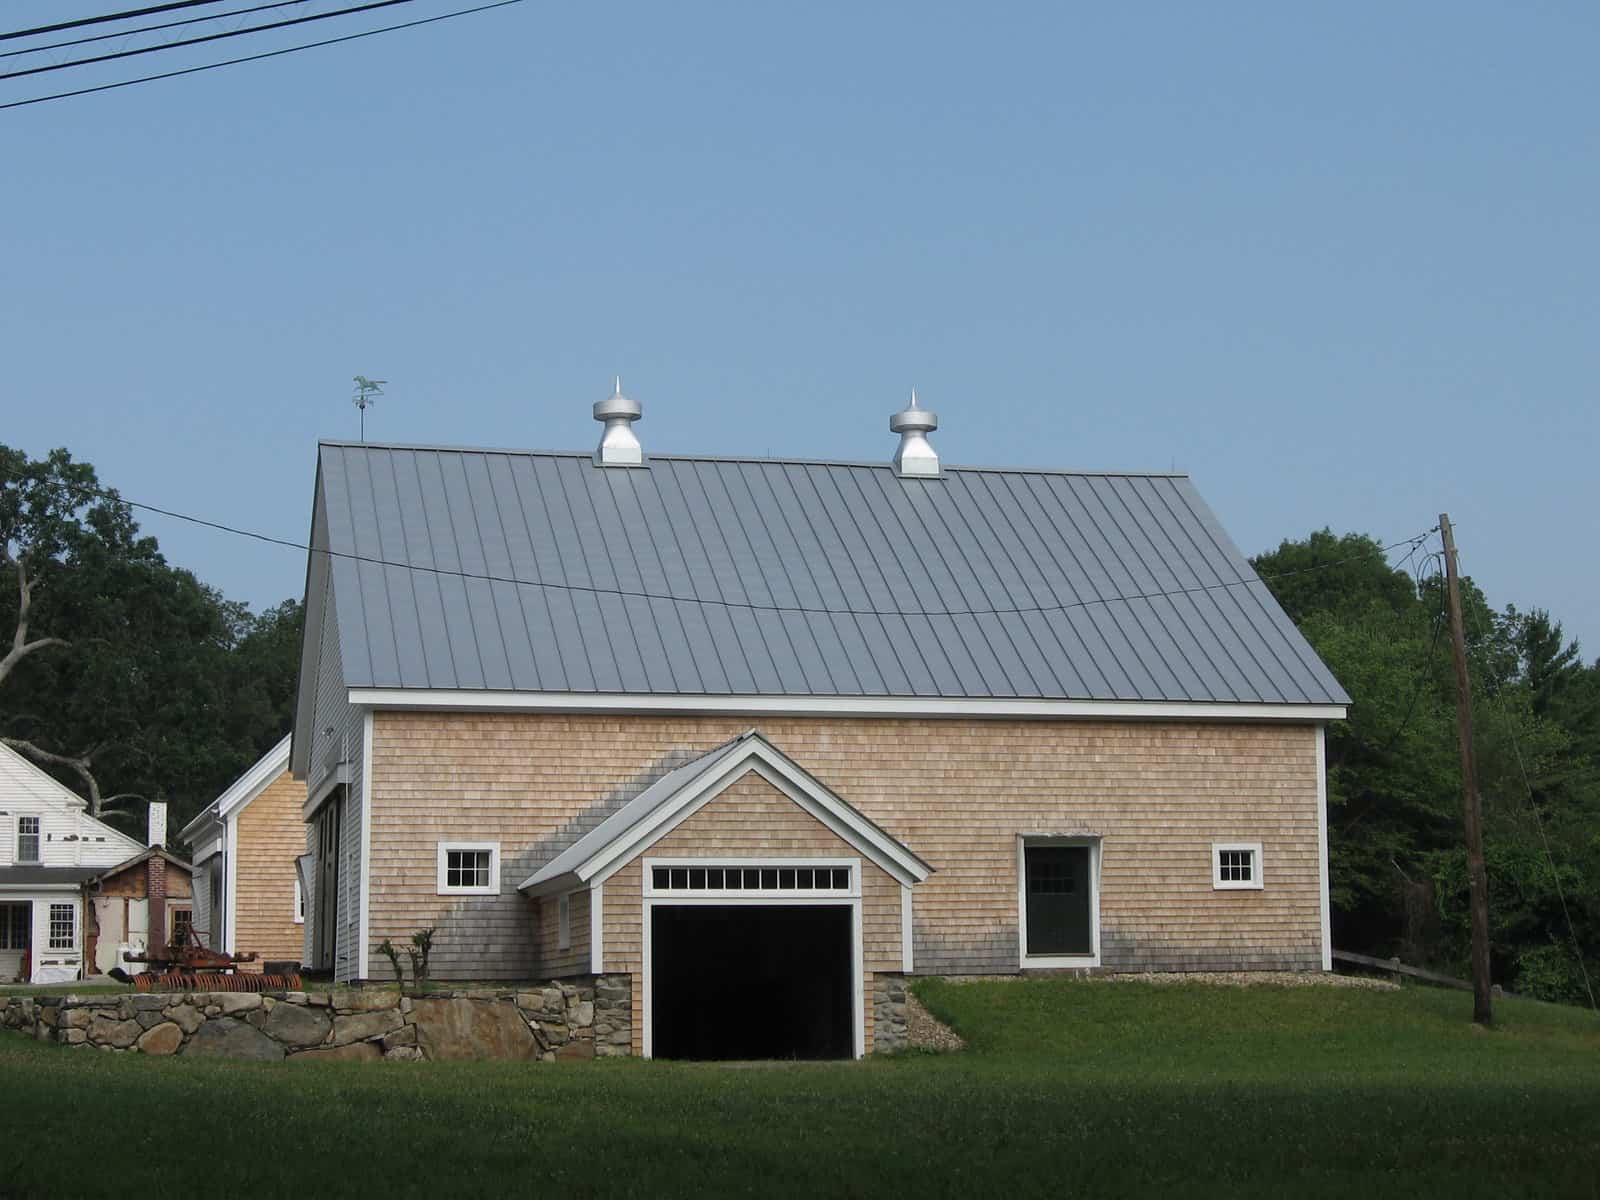 A newly constructed covered side entry on the restored barn  demonstrates how well the new work blends in with the old, especially the stone work.